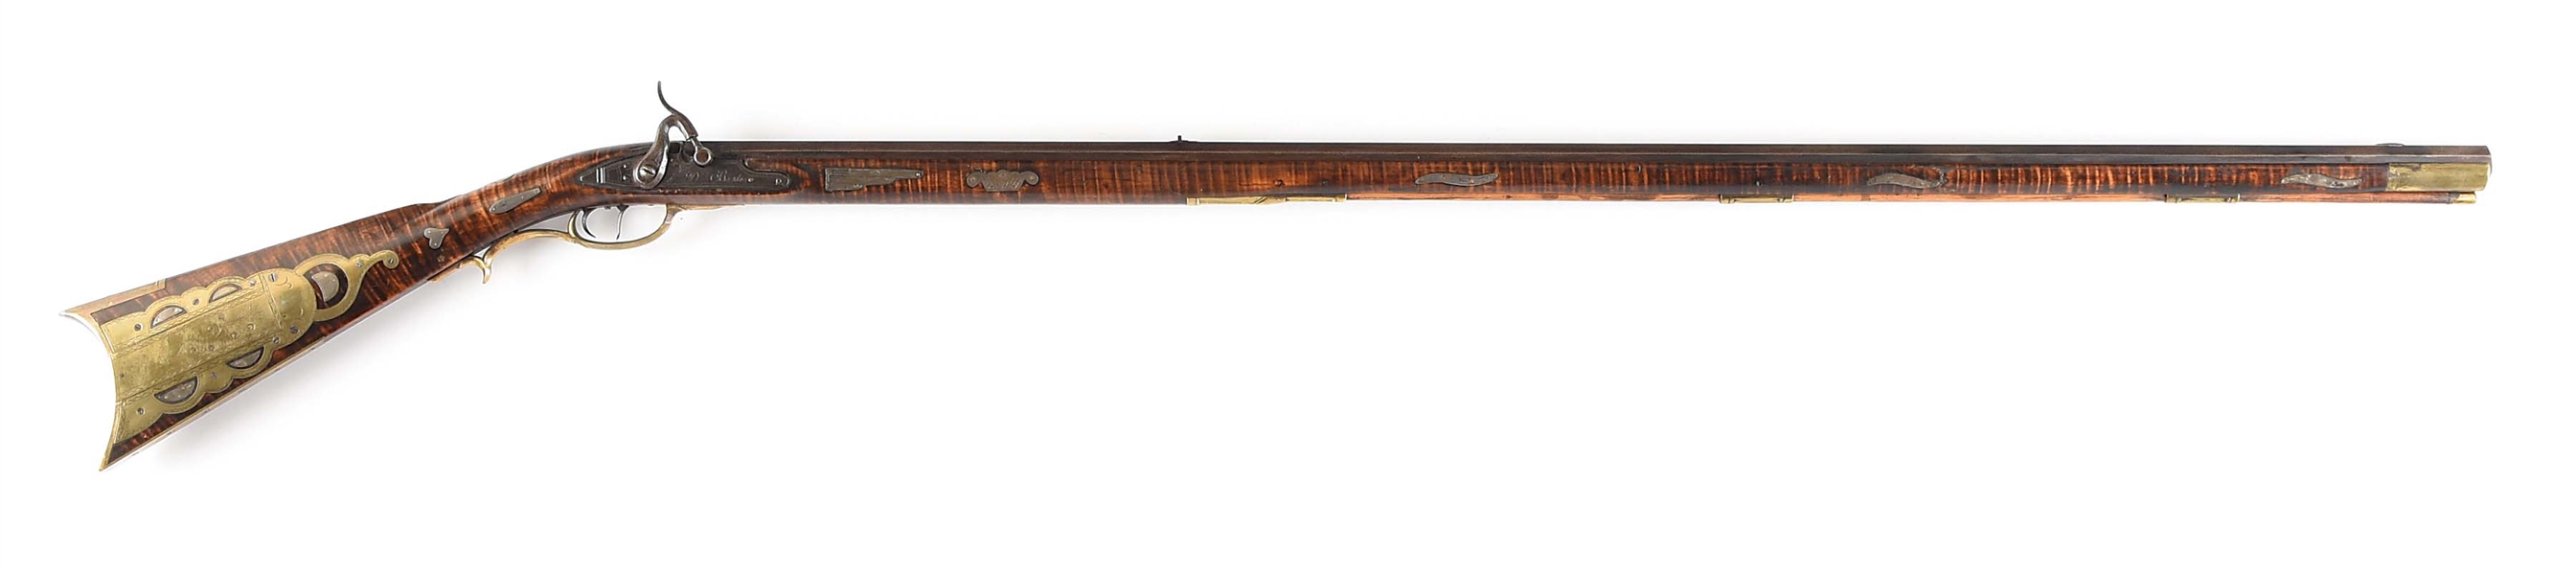 (A) FULLSTOCK SILVER-INLAID SIGNED BEDFORD COUNTY PERCUSSION KENTUCKY RIFLE BY DANIEL BORDER.